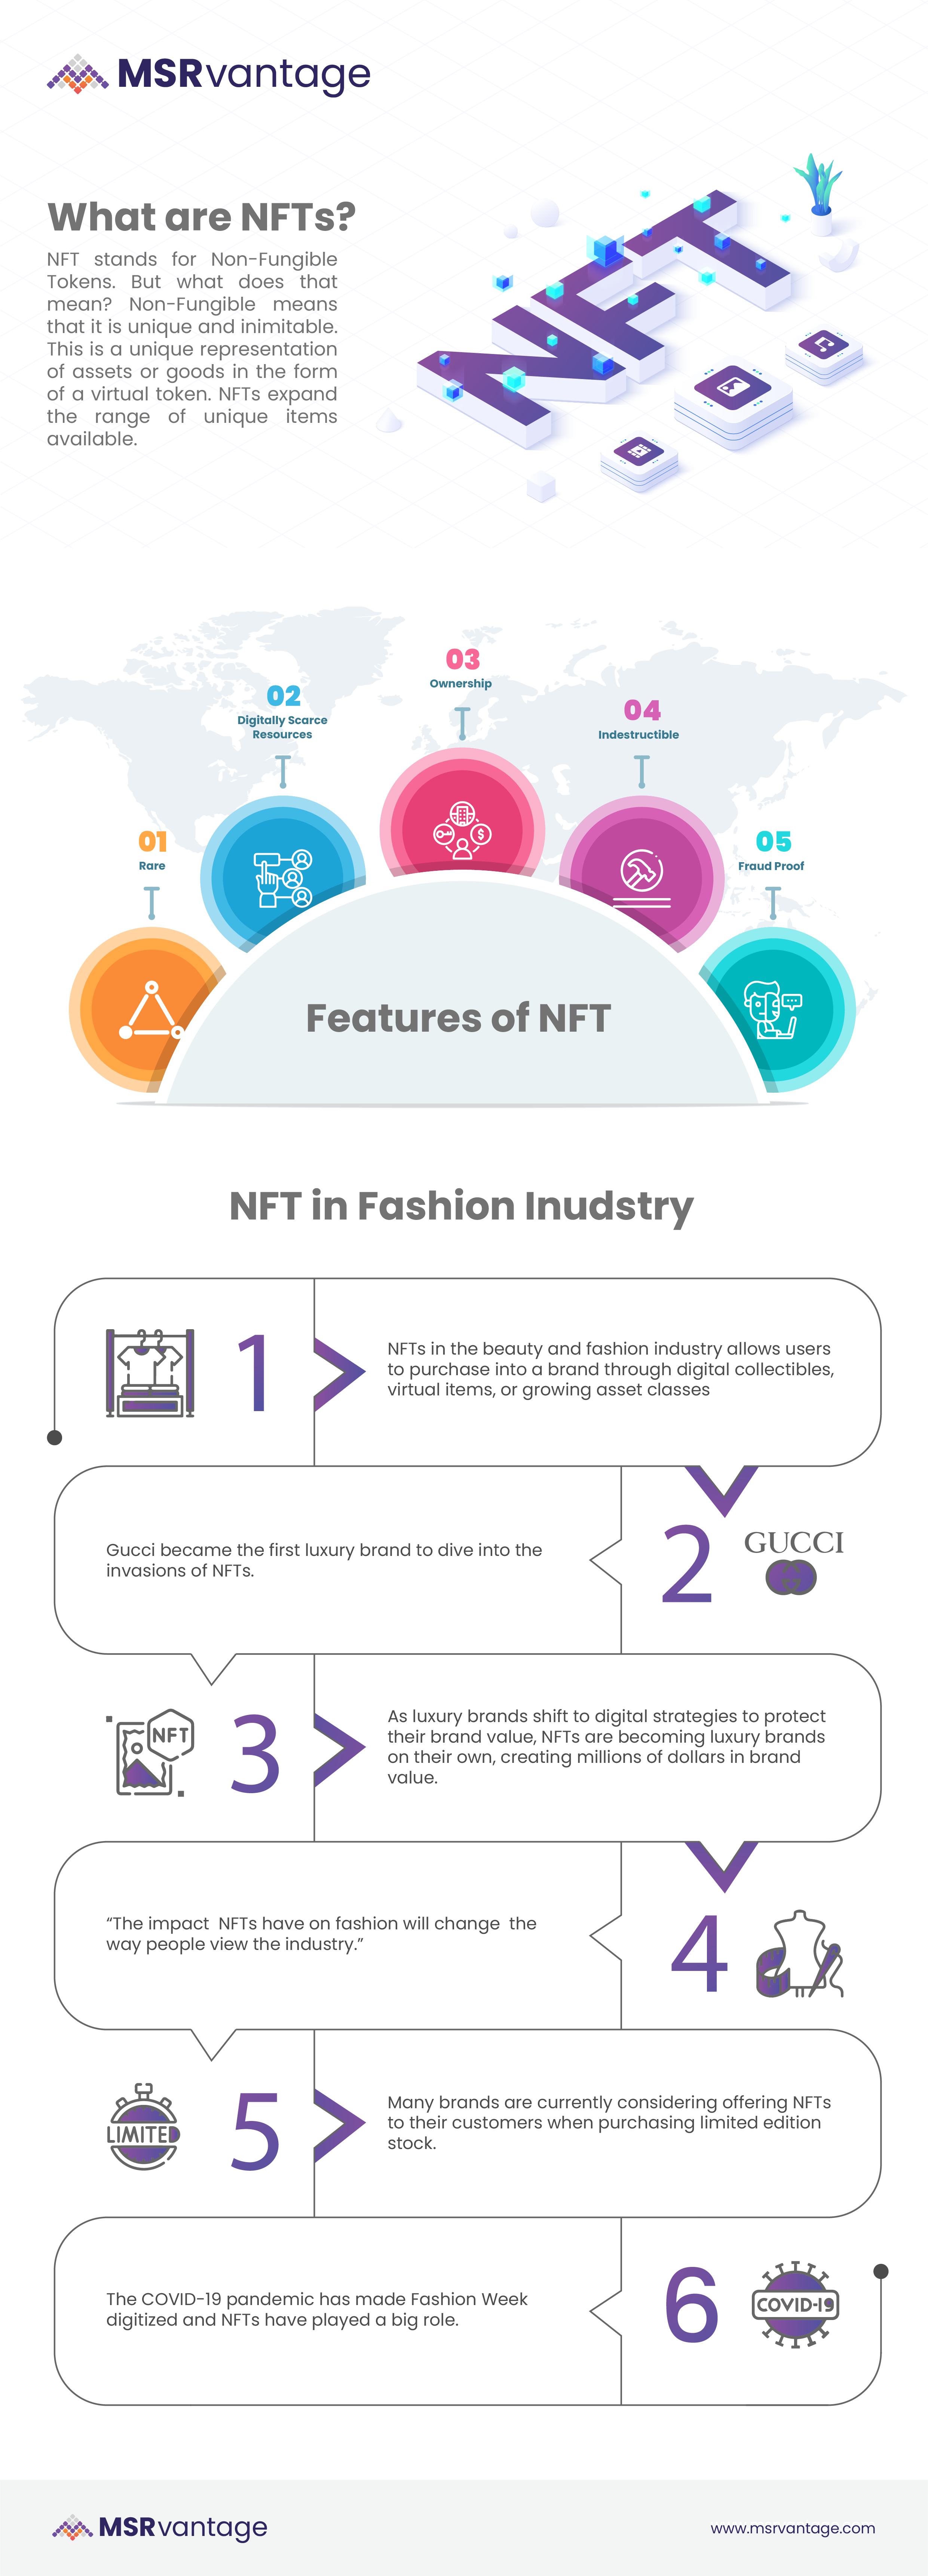 Chart: The Luxury Brands Selling Luxury NFTs